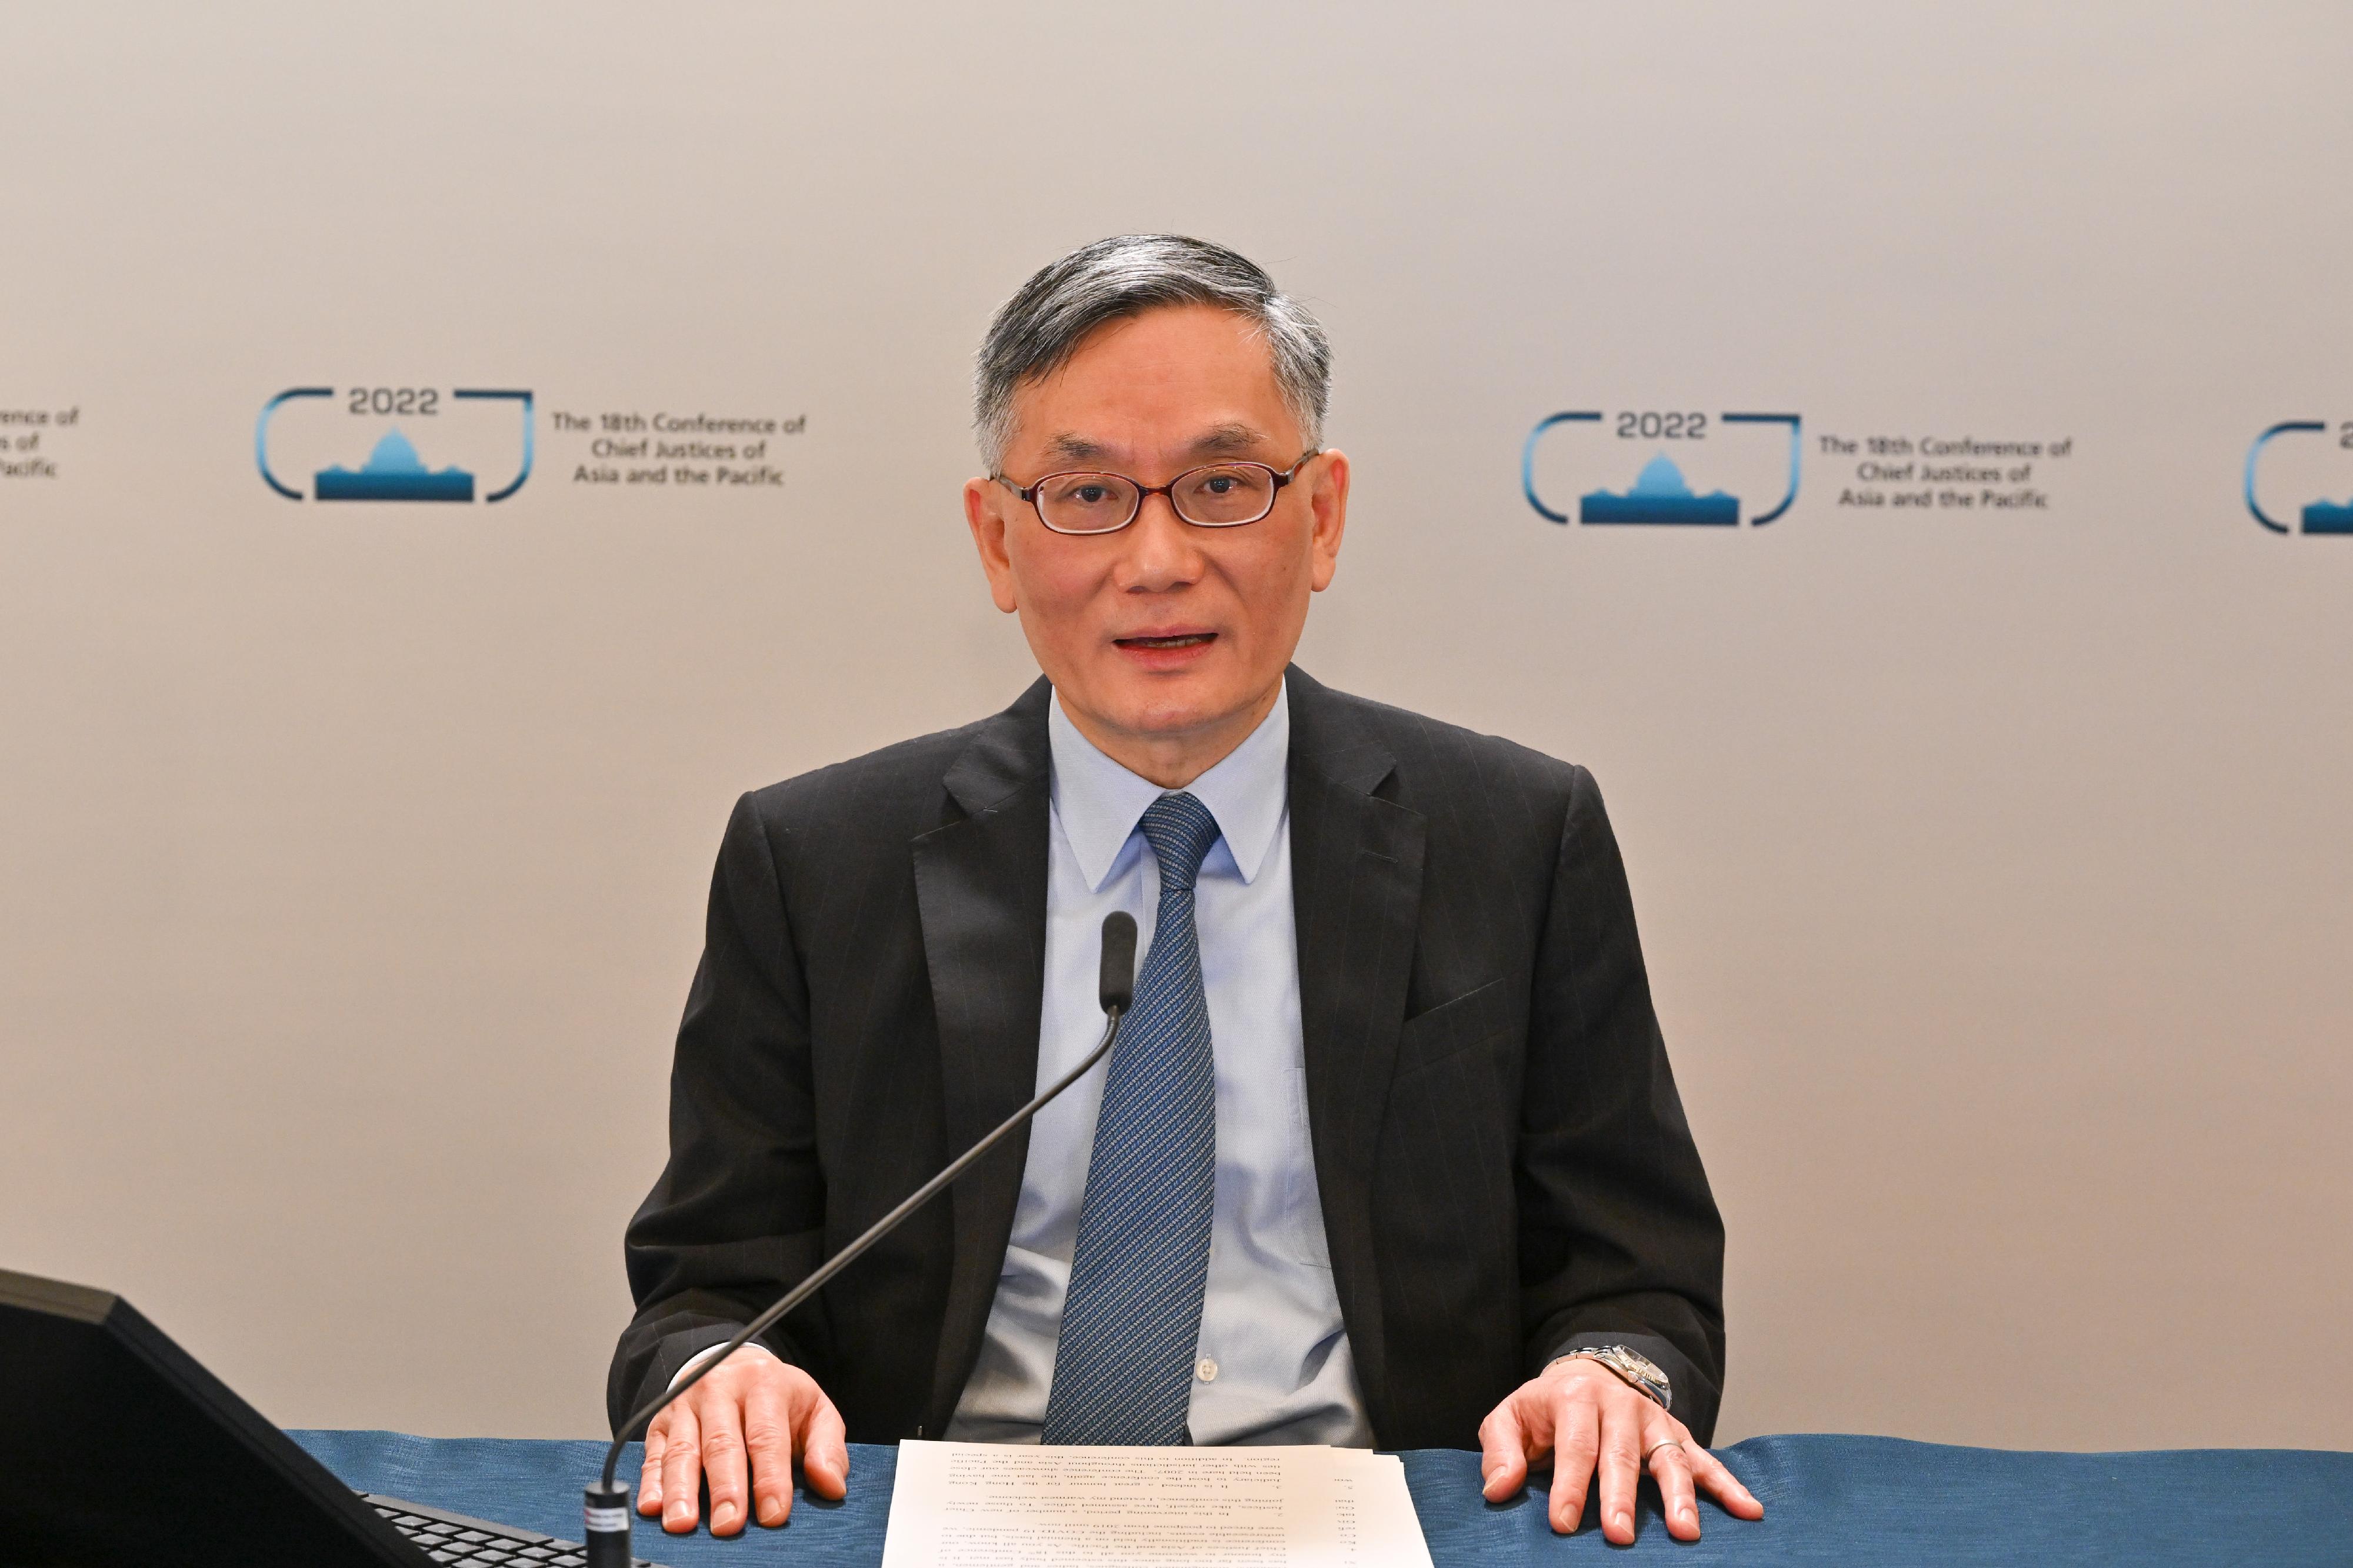 The Judiciary of the Hong Kong Special Administrative Region of the People’s Republic of China is hosting the 18th Conference of Chief Justices of Asia and the Pacific via video-conferencing today and tomorrow (November 16 and 17). Photo shows the Chief Justice of the Court of Final Appeal, Mr Andrew Cheung Kui-nung, addressing the conference today.